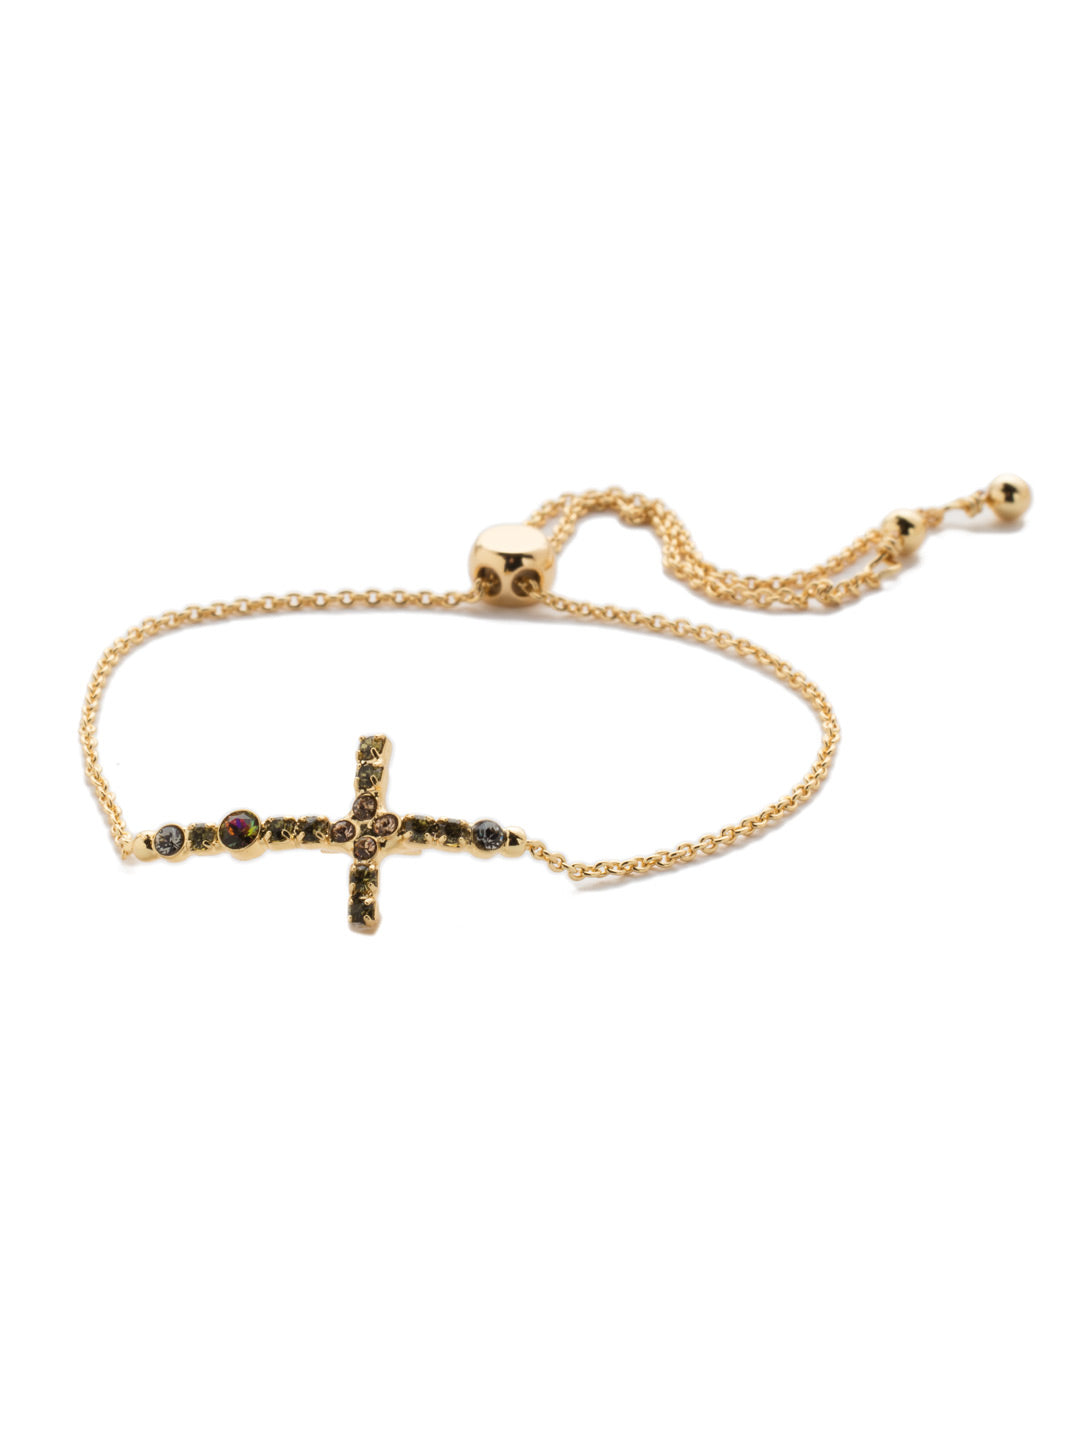 Giovanna Slider Bracelet - BEN1BGCSM - The Giovanna Slider Bracelet features the crystal-encrusted cross fans are looking to slip on. Just adjust to your wrist size and you're set. From Sorrelli's Cashmere collection in our Bright Gold-tone finish.